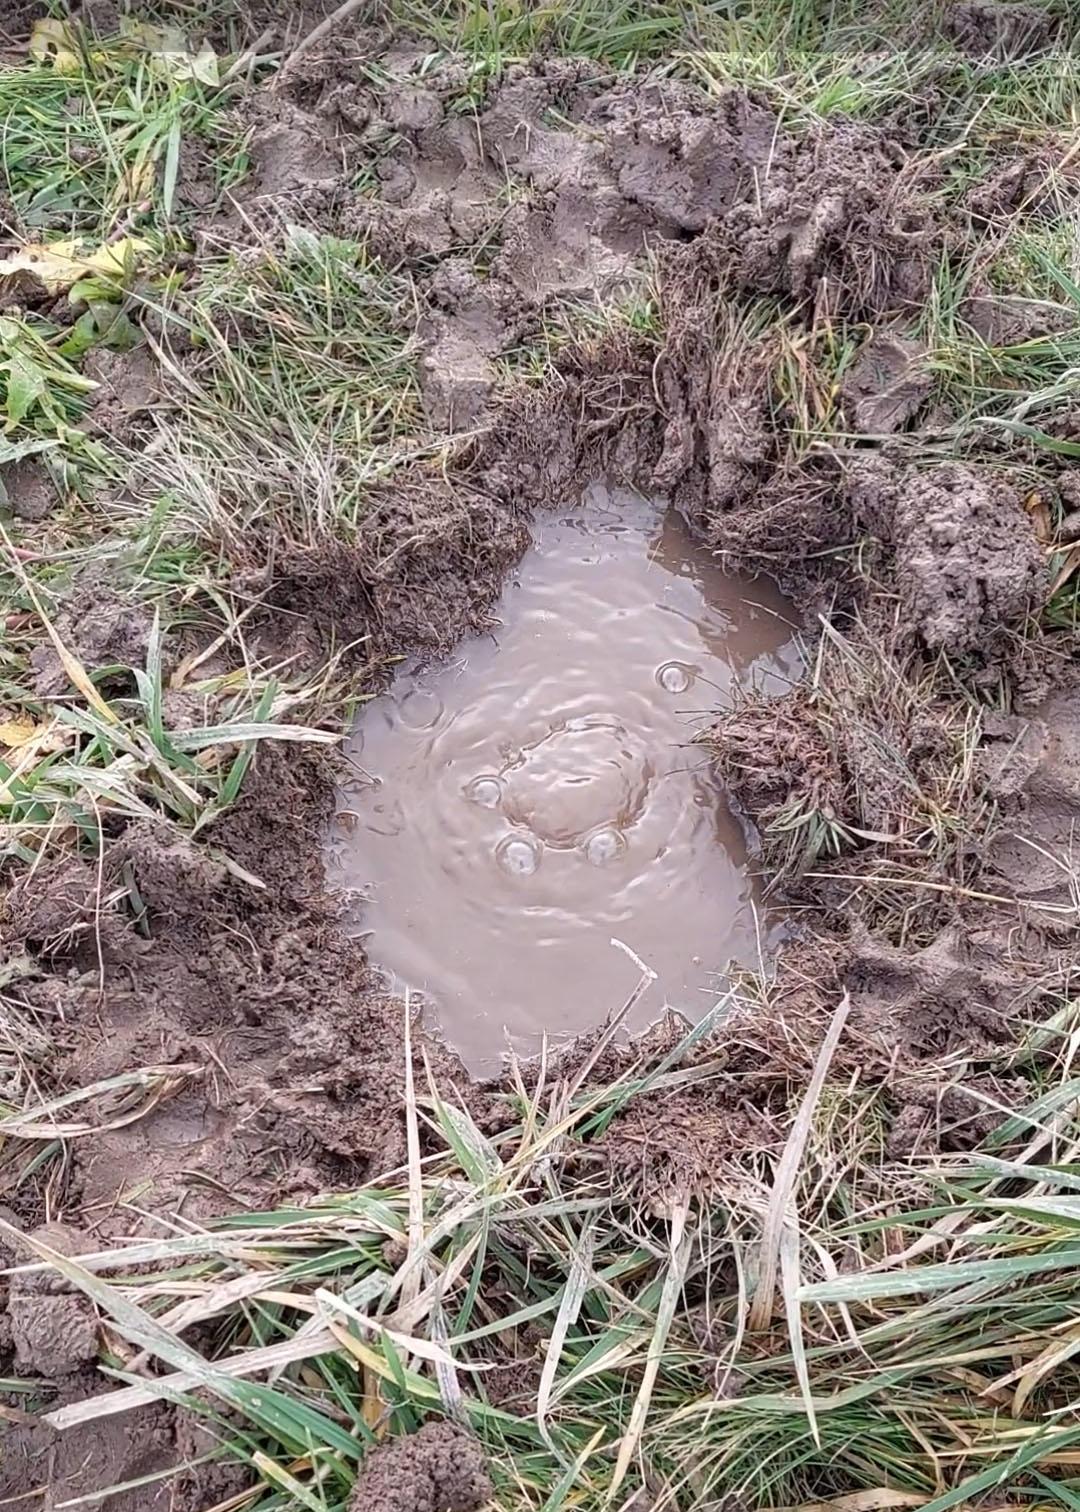 Gas bubbles up through a puddle in a field